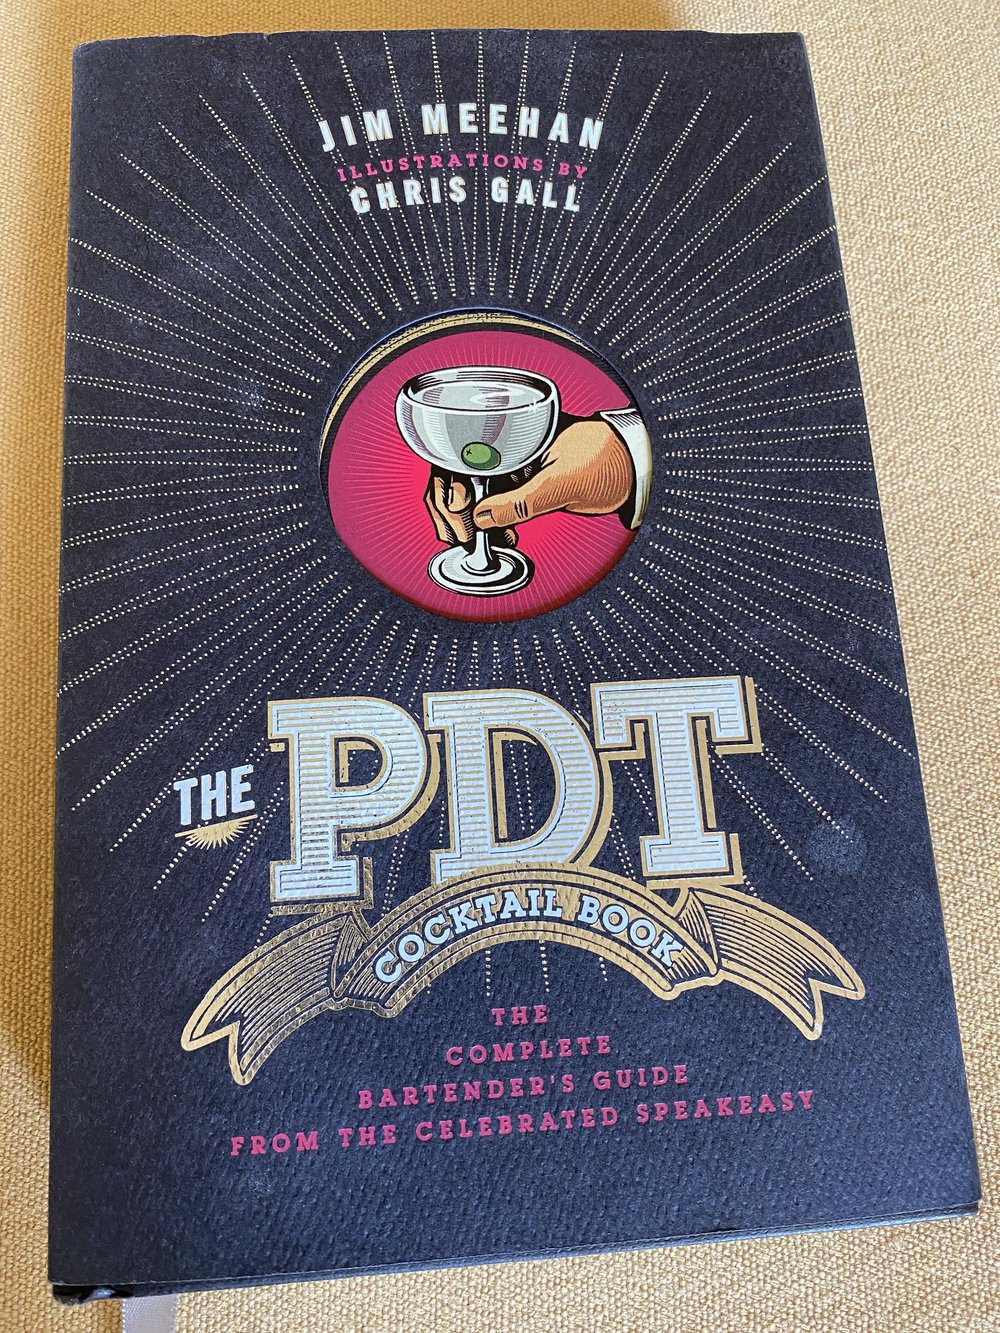 The PDT Cocktail Book